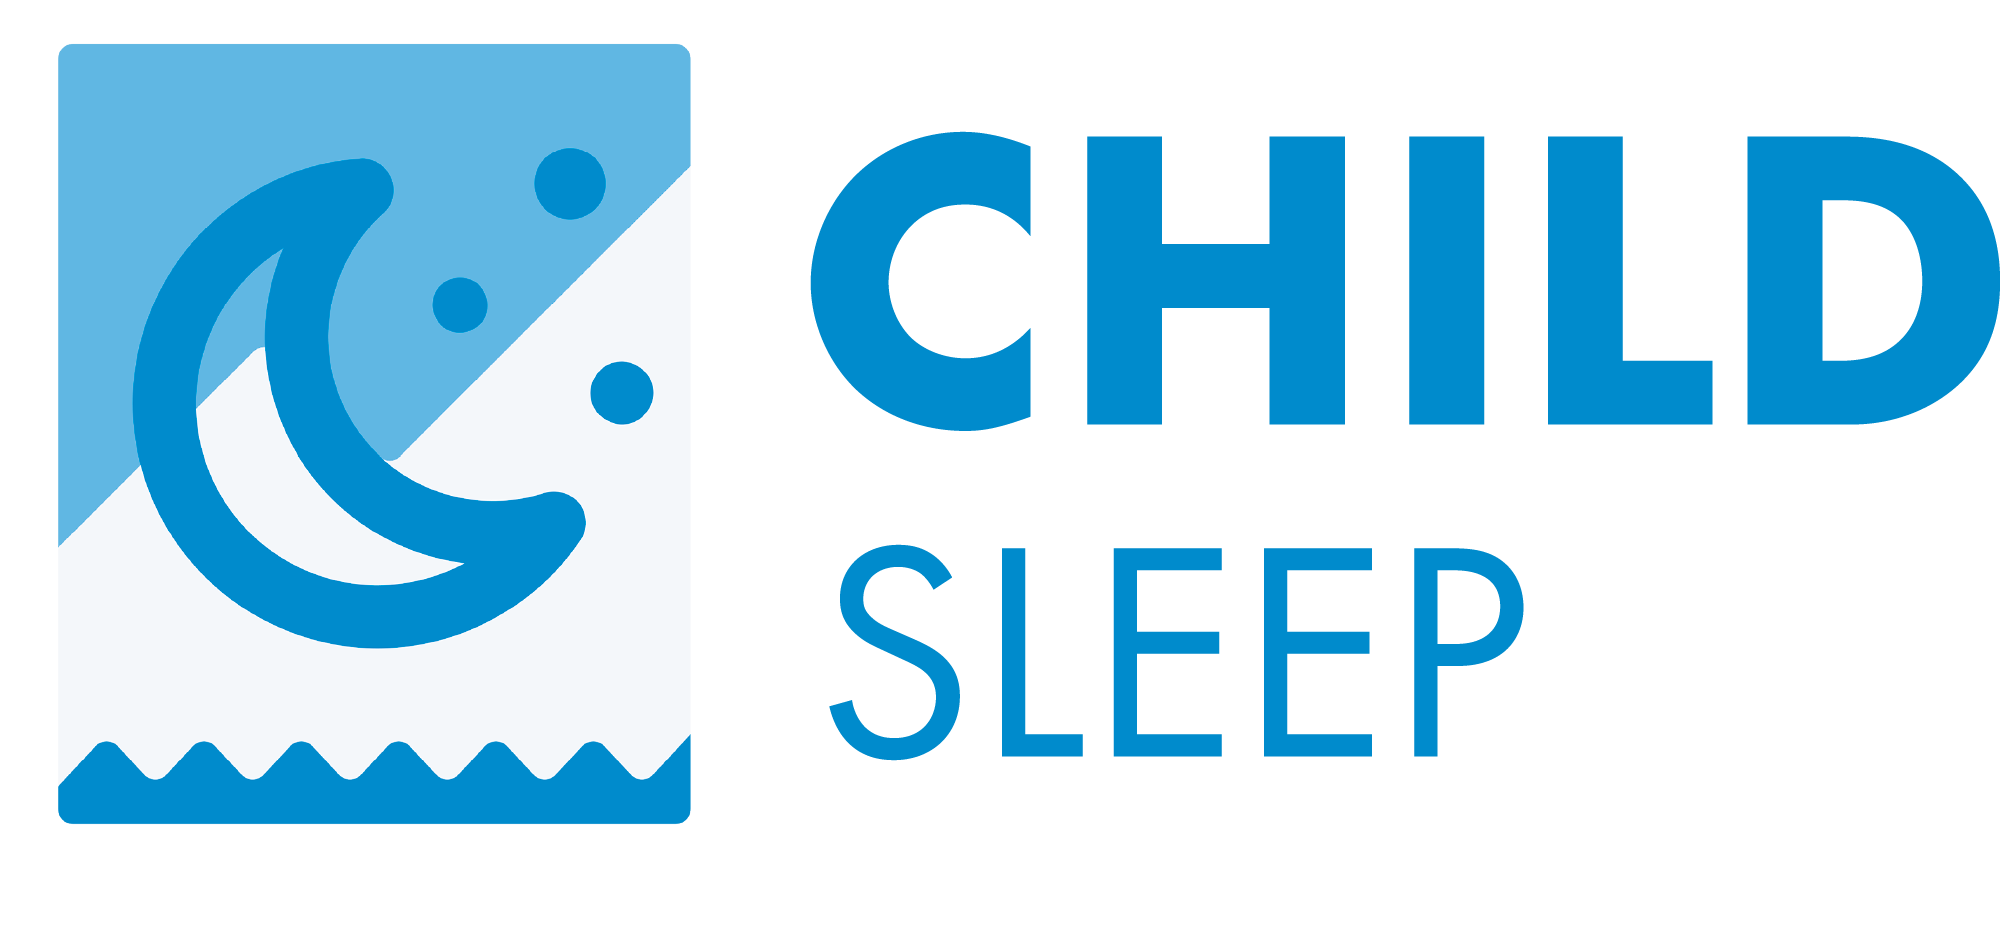 A study of the sleep-wakefulness cycle of children living in the Arctic 
was co-funded by PORA. Experts examined more than 1,000 children aged 7 to 12 living in an area stretching from the Murmansk Oblast to the Taimyr Peninsula.